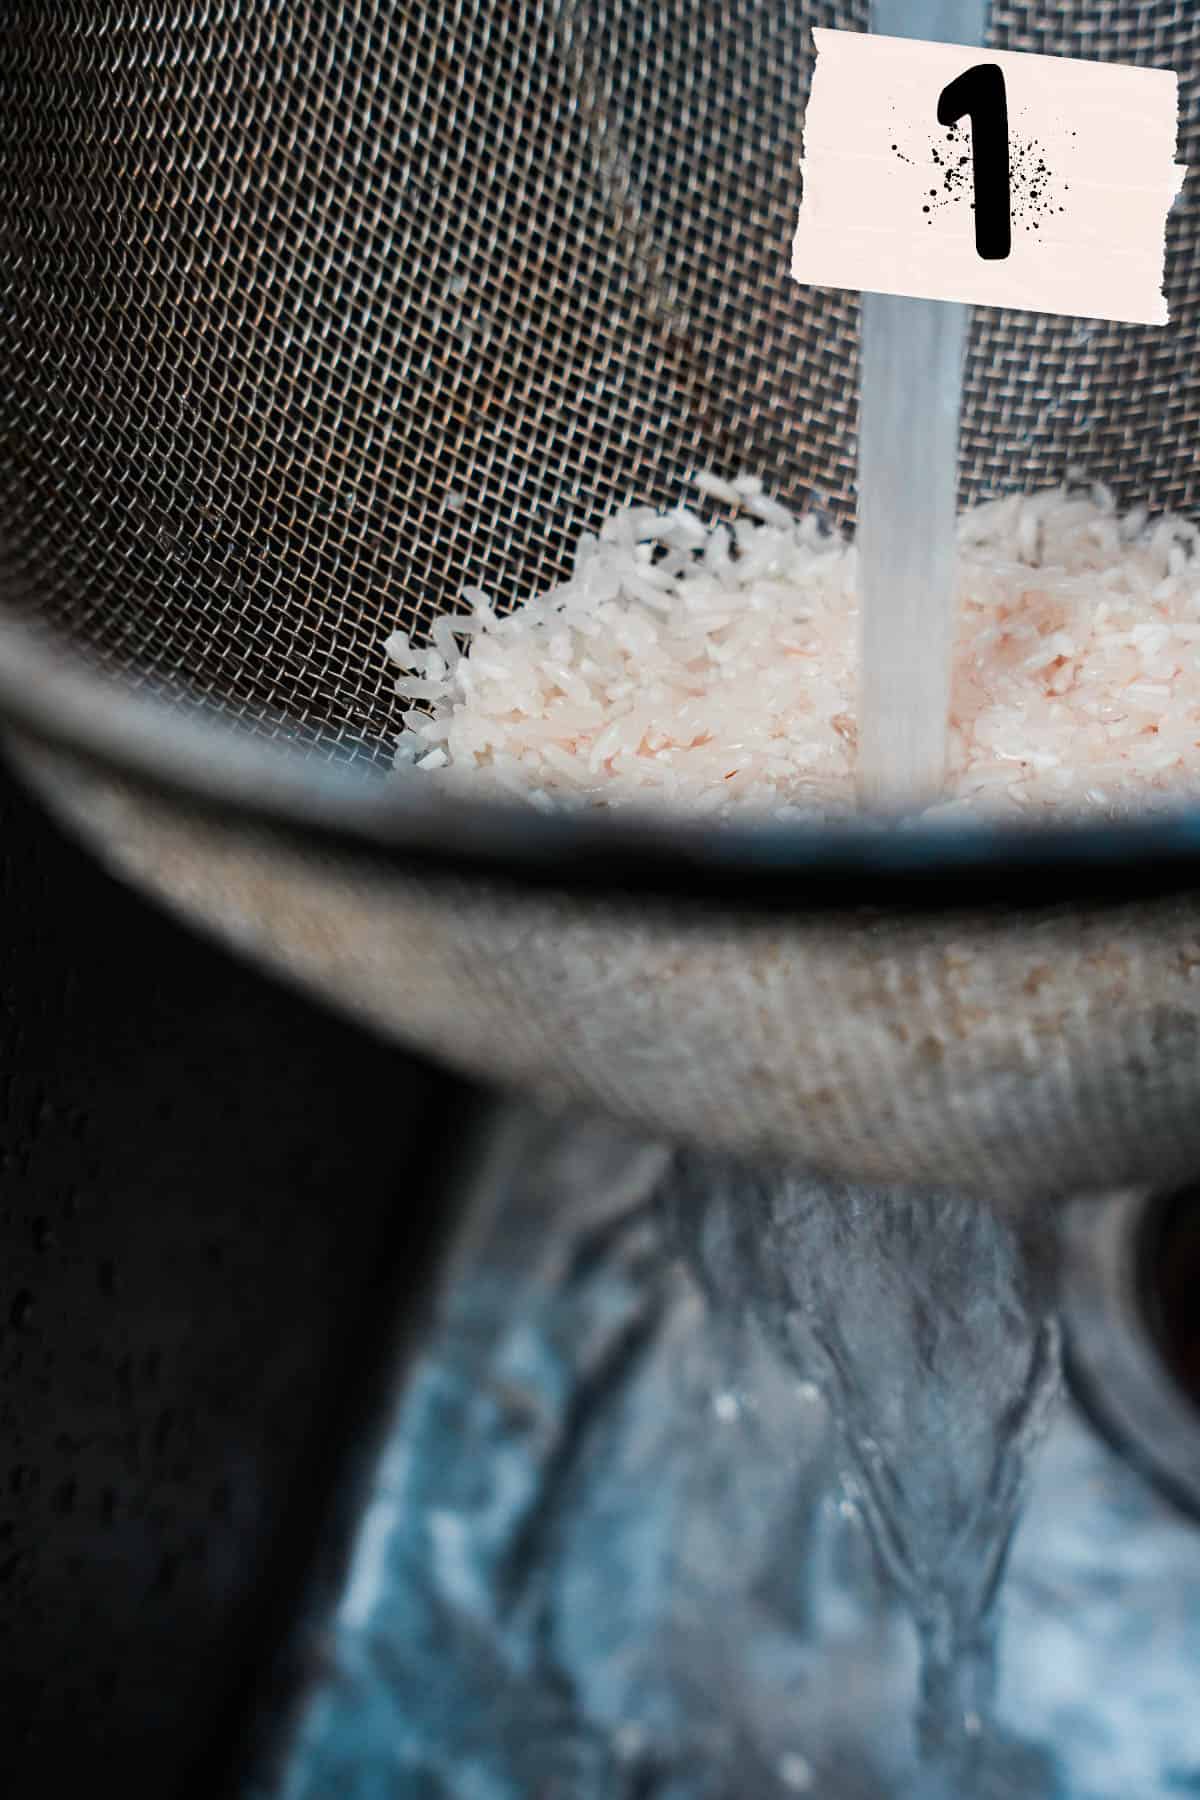 White rice is rinsed in a wire mesh strainer.